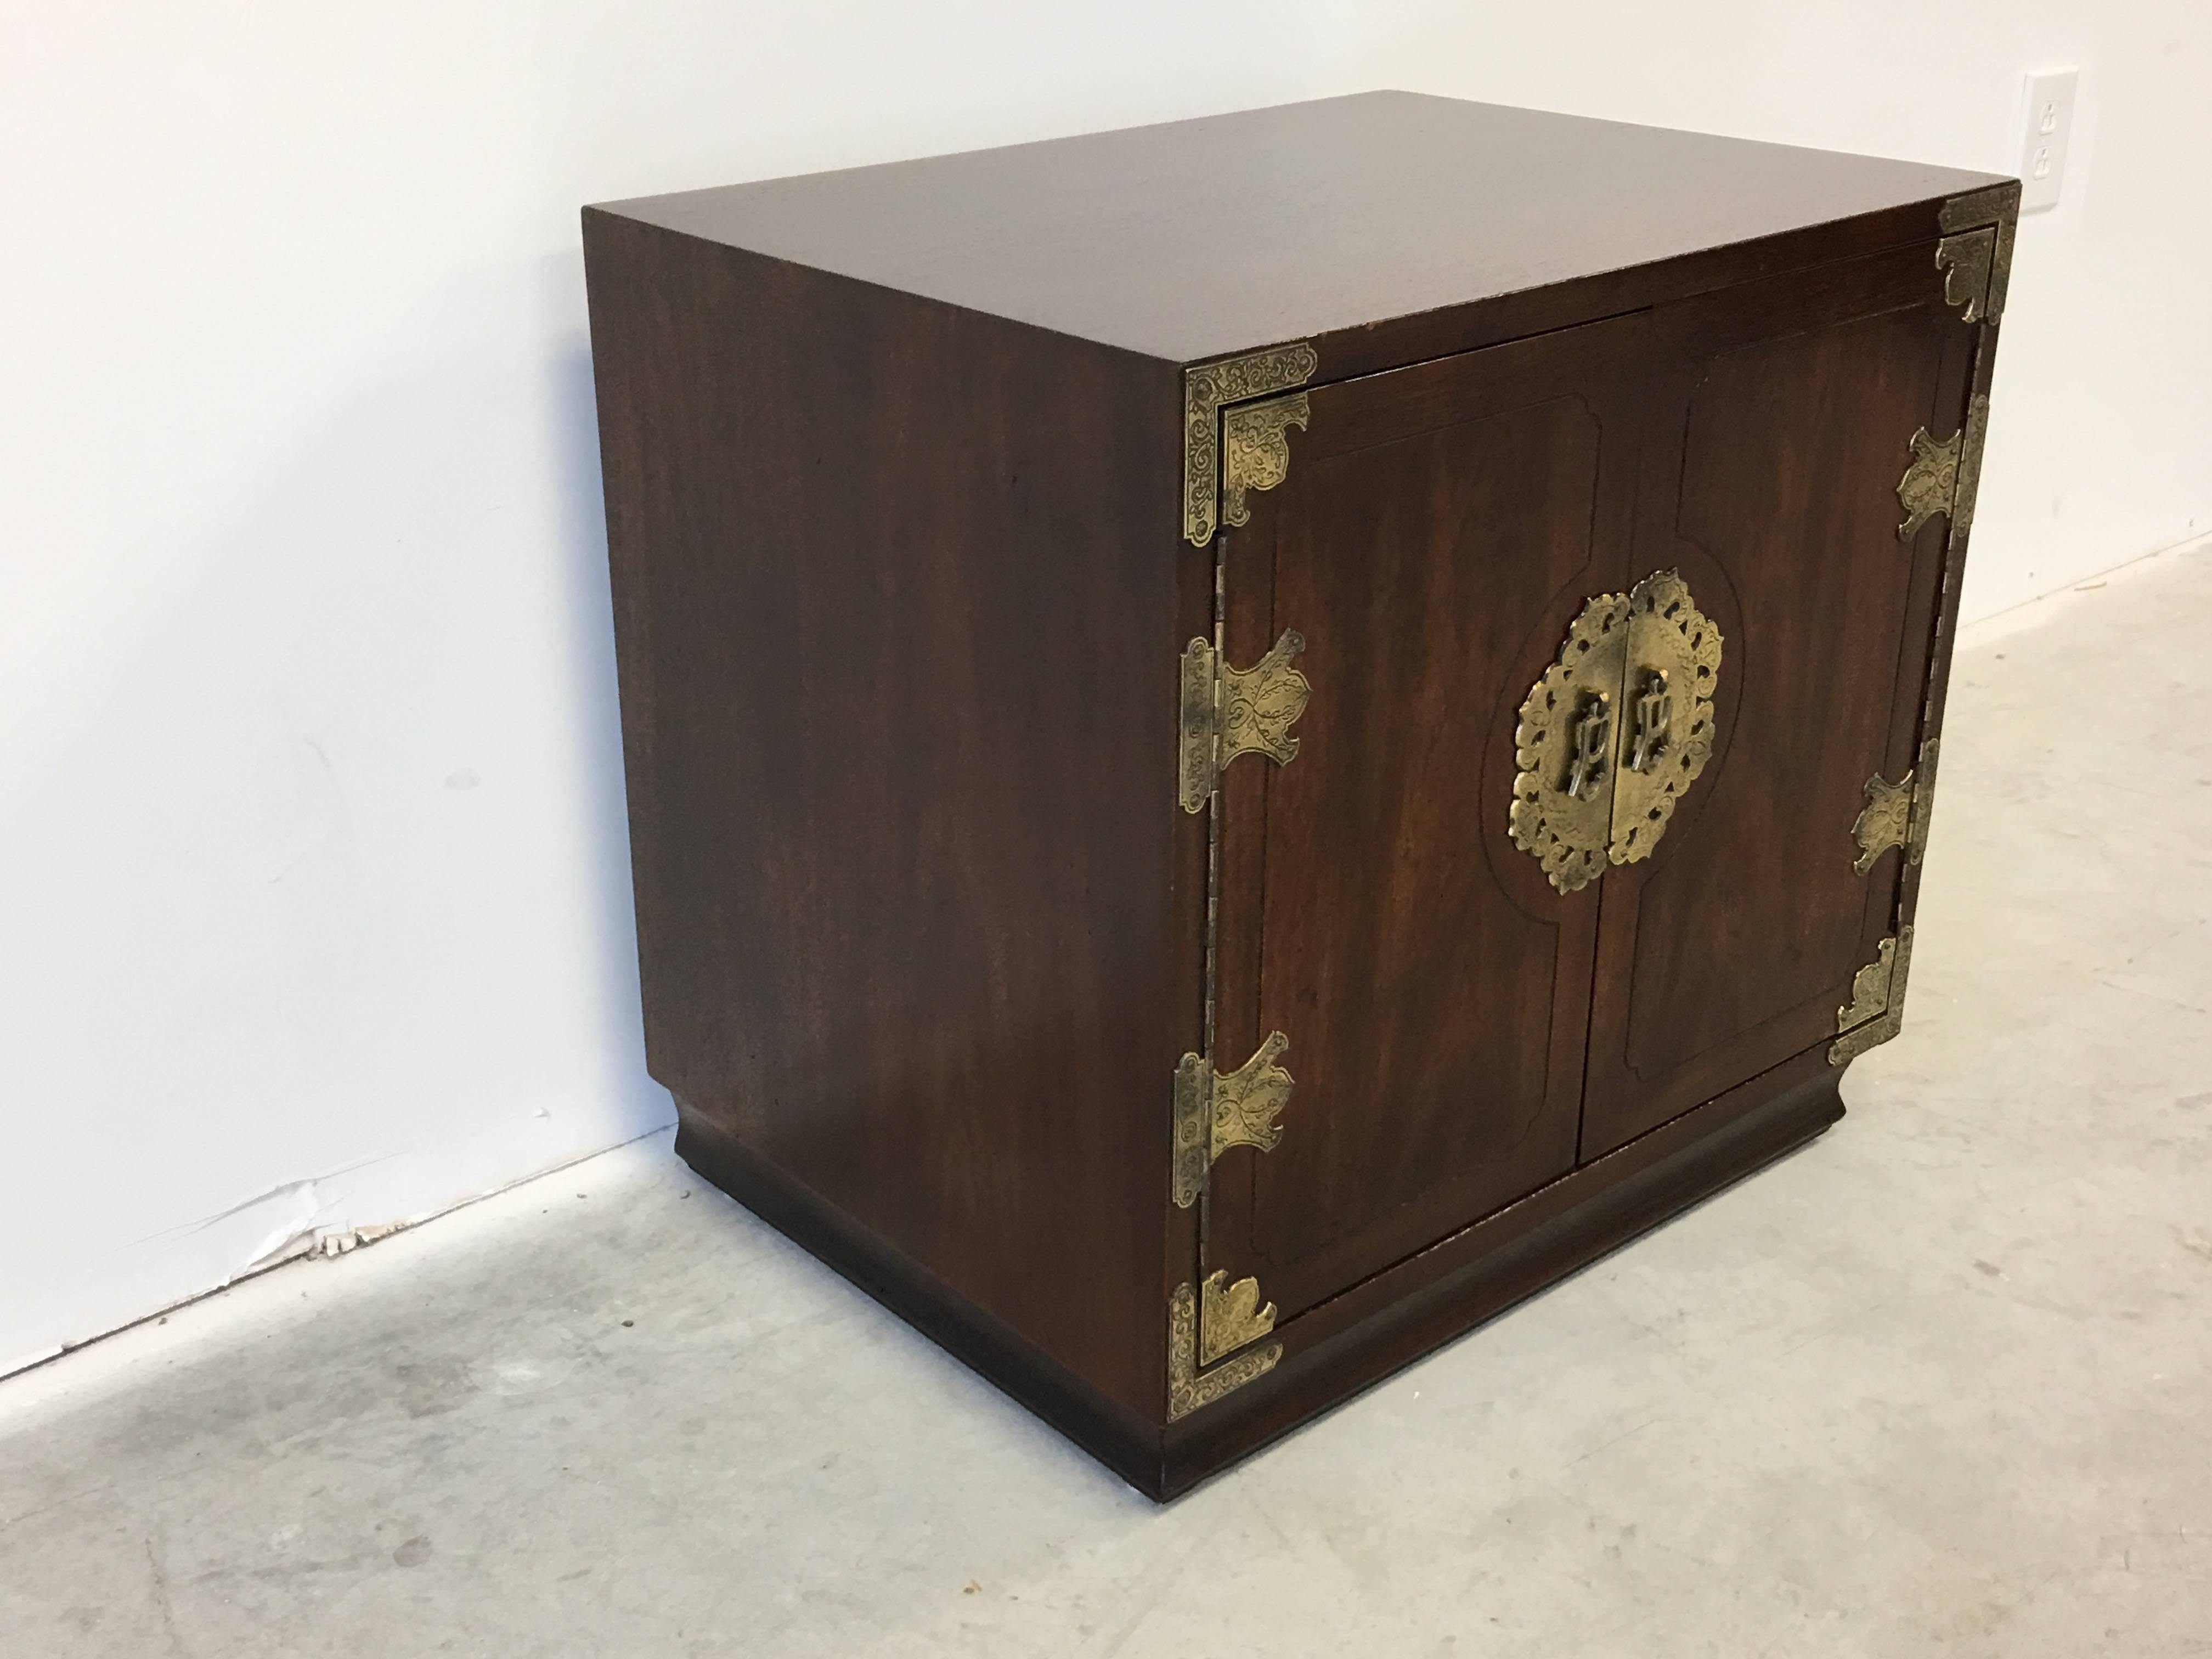 Offered is a stunning, 1970s Henredon, Asian Style Campaign chest with intricate brass hardware. Doors open up to storage, with a single shelf. Four electrical holes cutout along the backside, convenient for phone or computer chargers.